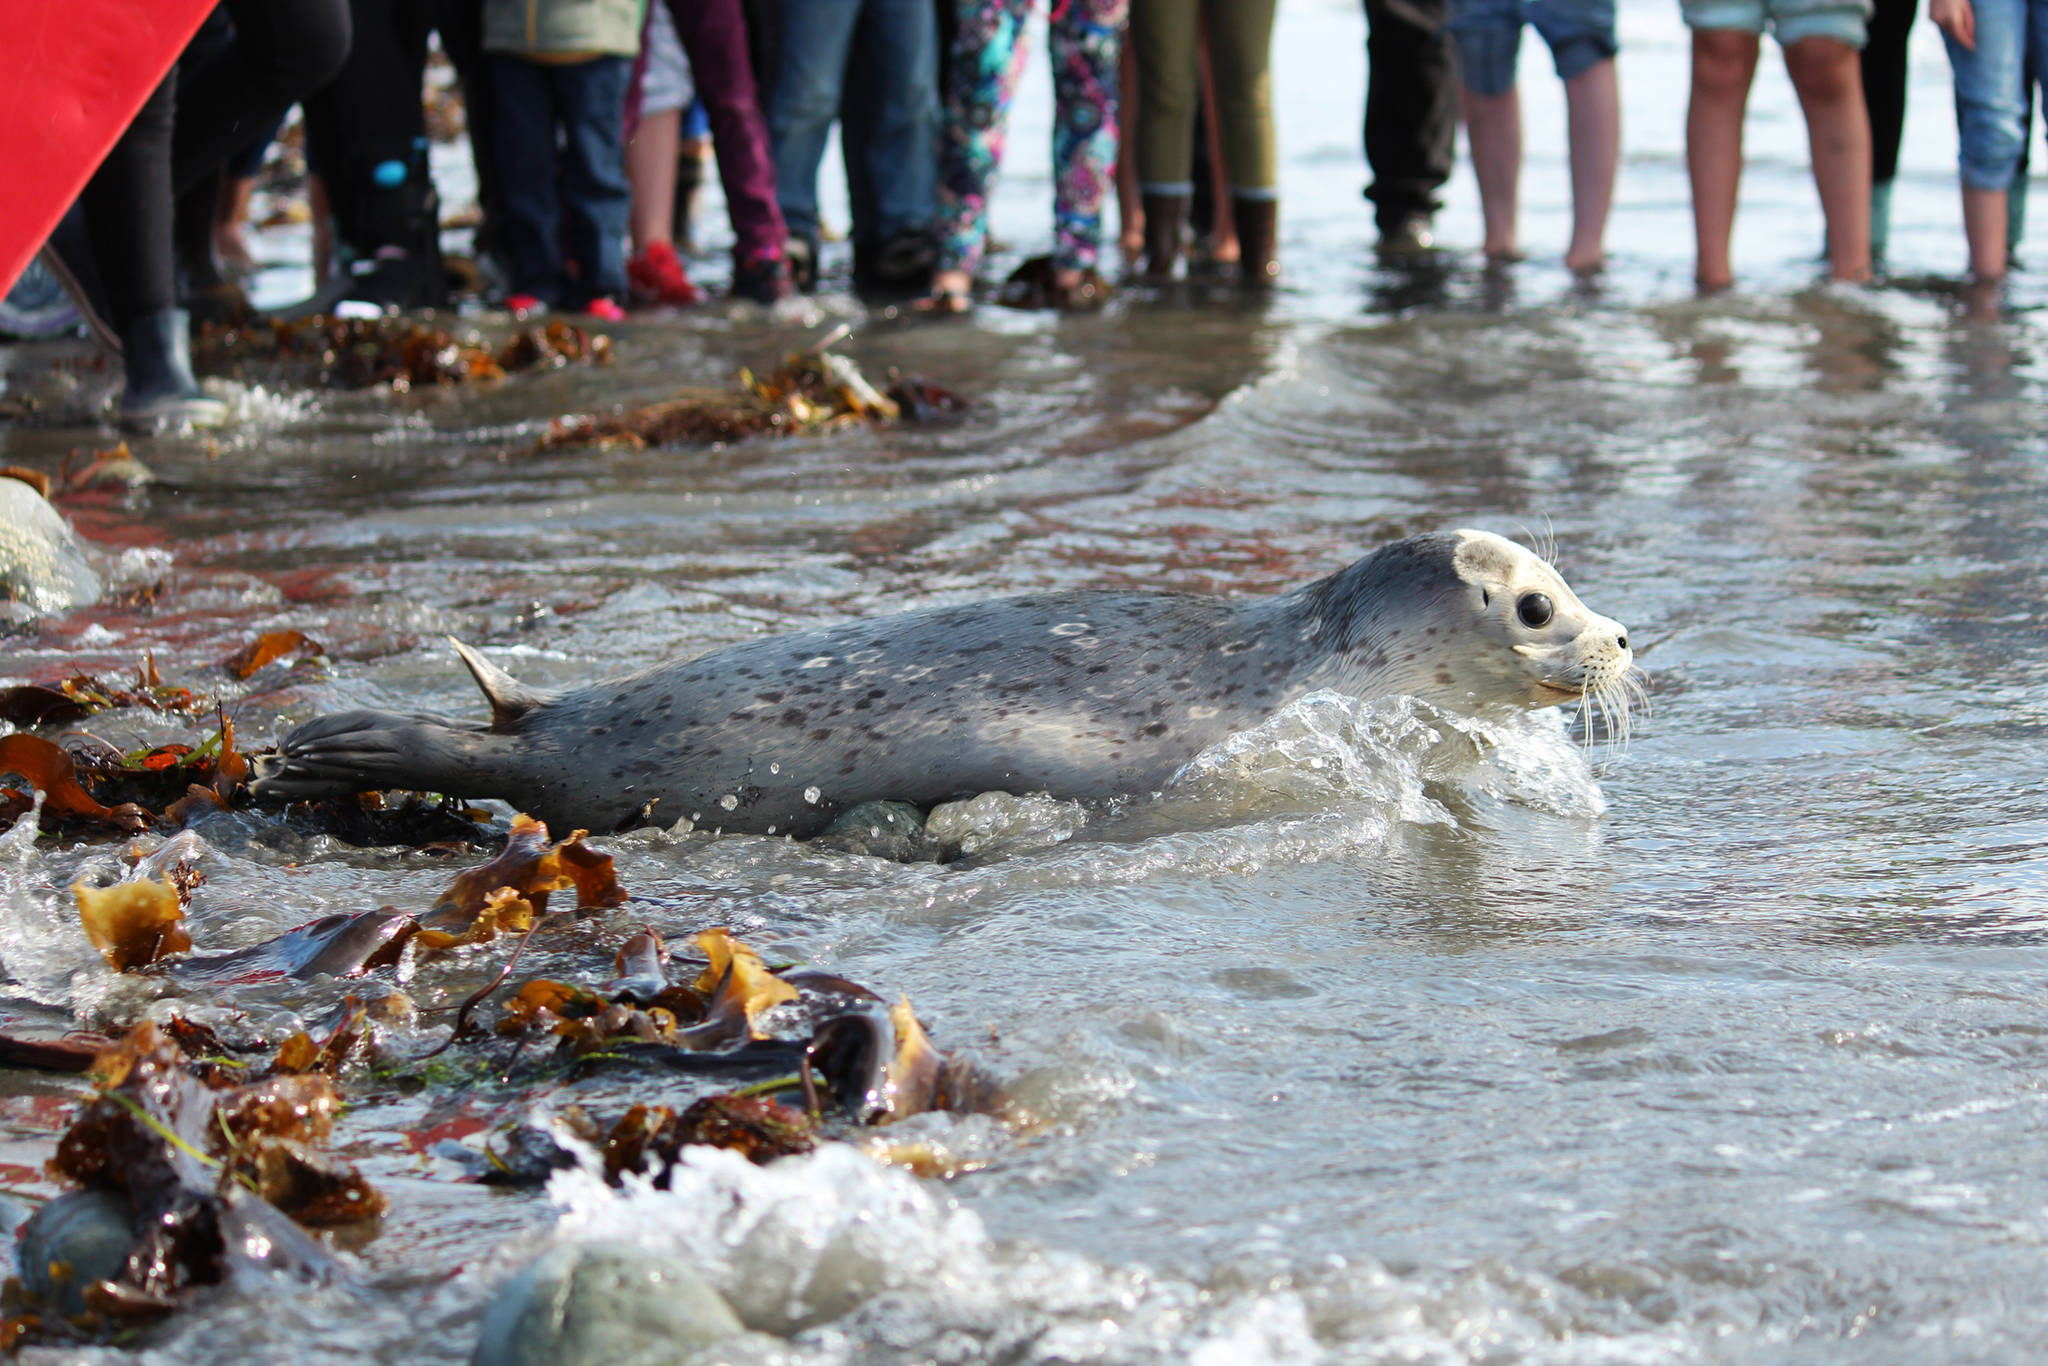 A harbor seal swims into the waters of Kachemak Bay after being released back into the wild by the Alaska SeaLife Center on Thursday, Sept. 5, 2019 at Bishop’s Beach in Homer, Alaska. The center released two harbor seals Thursday after rehabilitating them through the Wildlife Response Program. The seals were found neglected on Homer area beaches along Kachemak Bay this May. (Photo by Megan Pacer/Homer News)